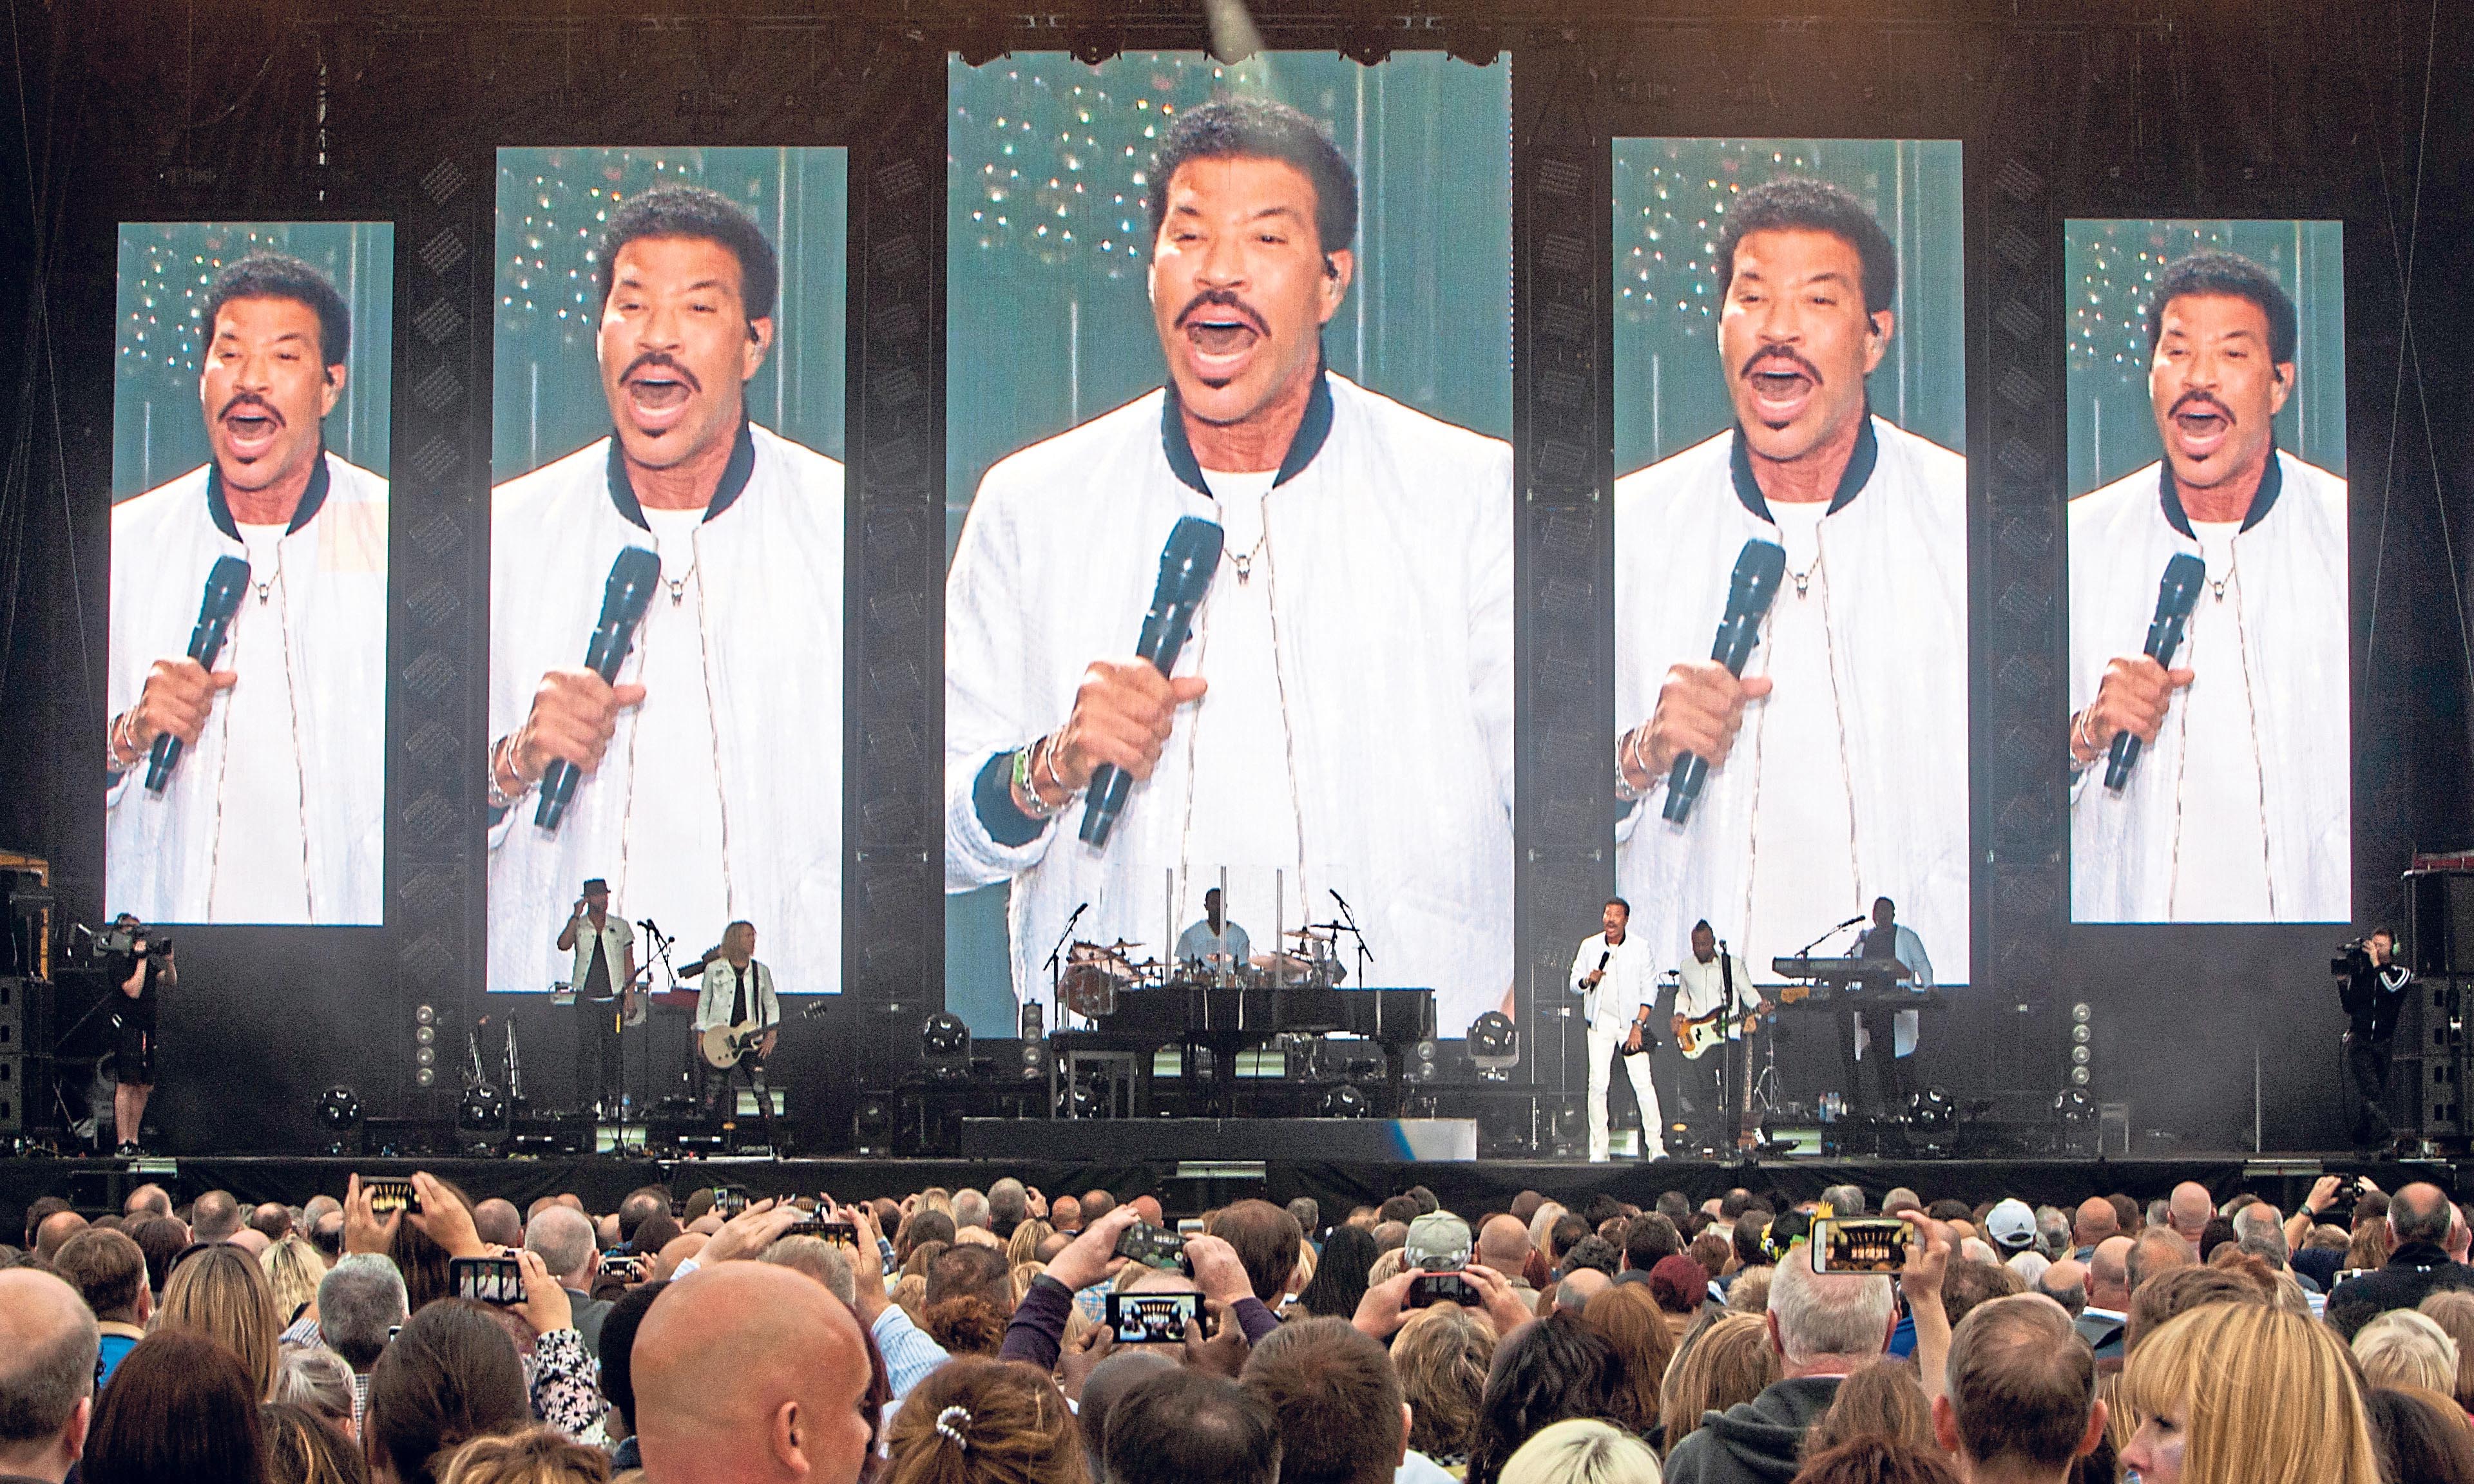 Lionel Richie danced on the McDiarmid Park stage in Perth. Steve MacDougall/DCT Media